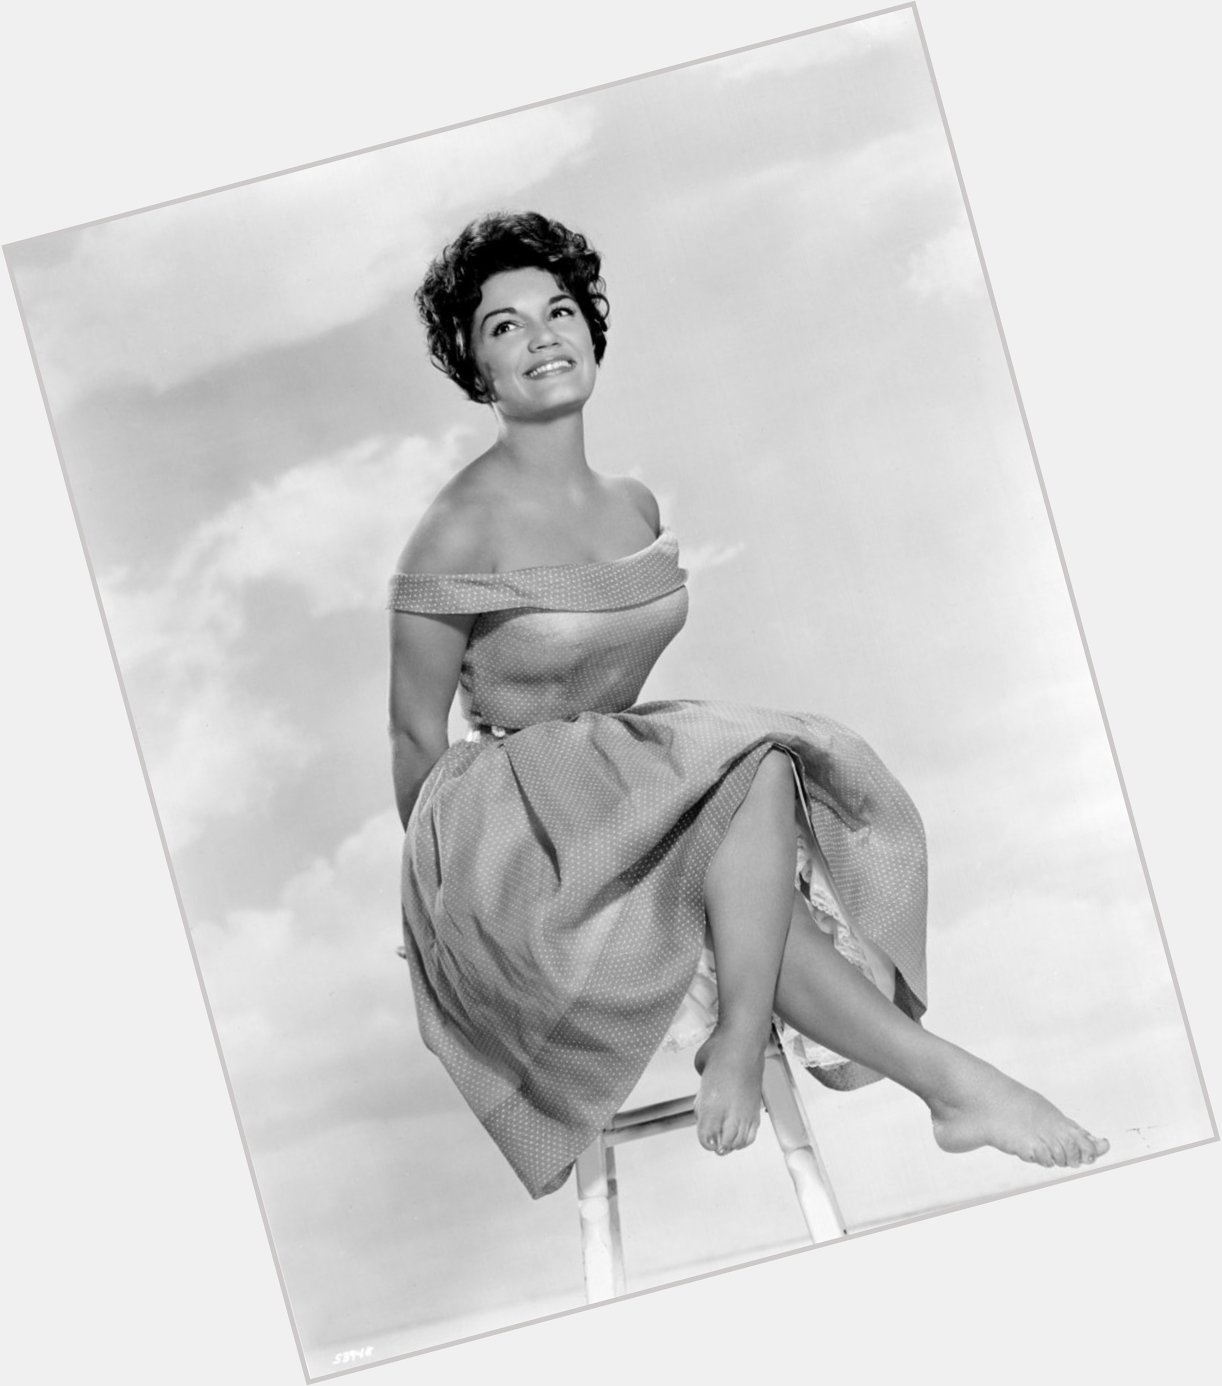 Happy Birthday to Connie Francis, who turns 79 today! 